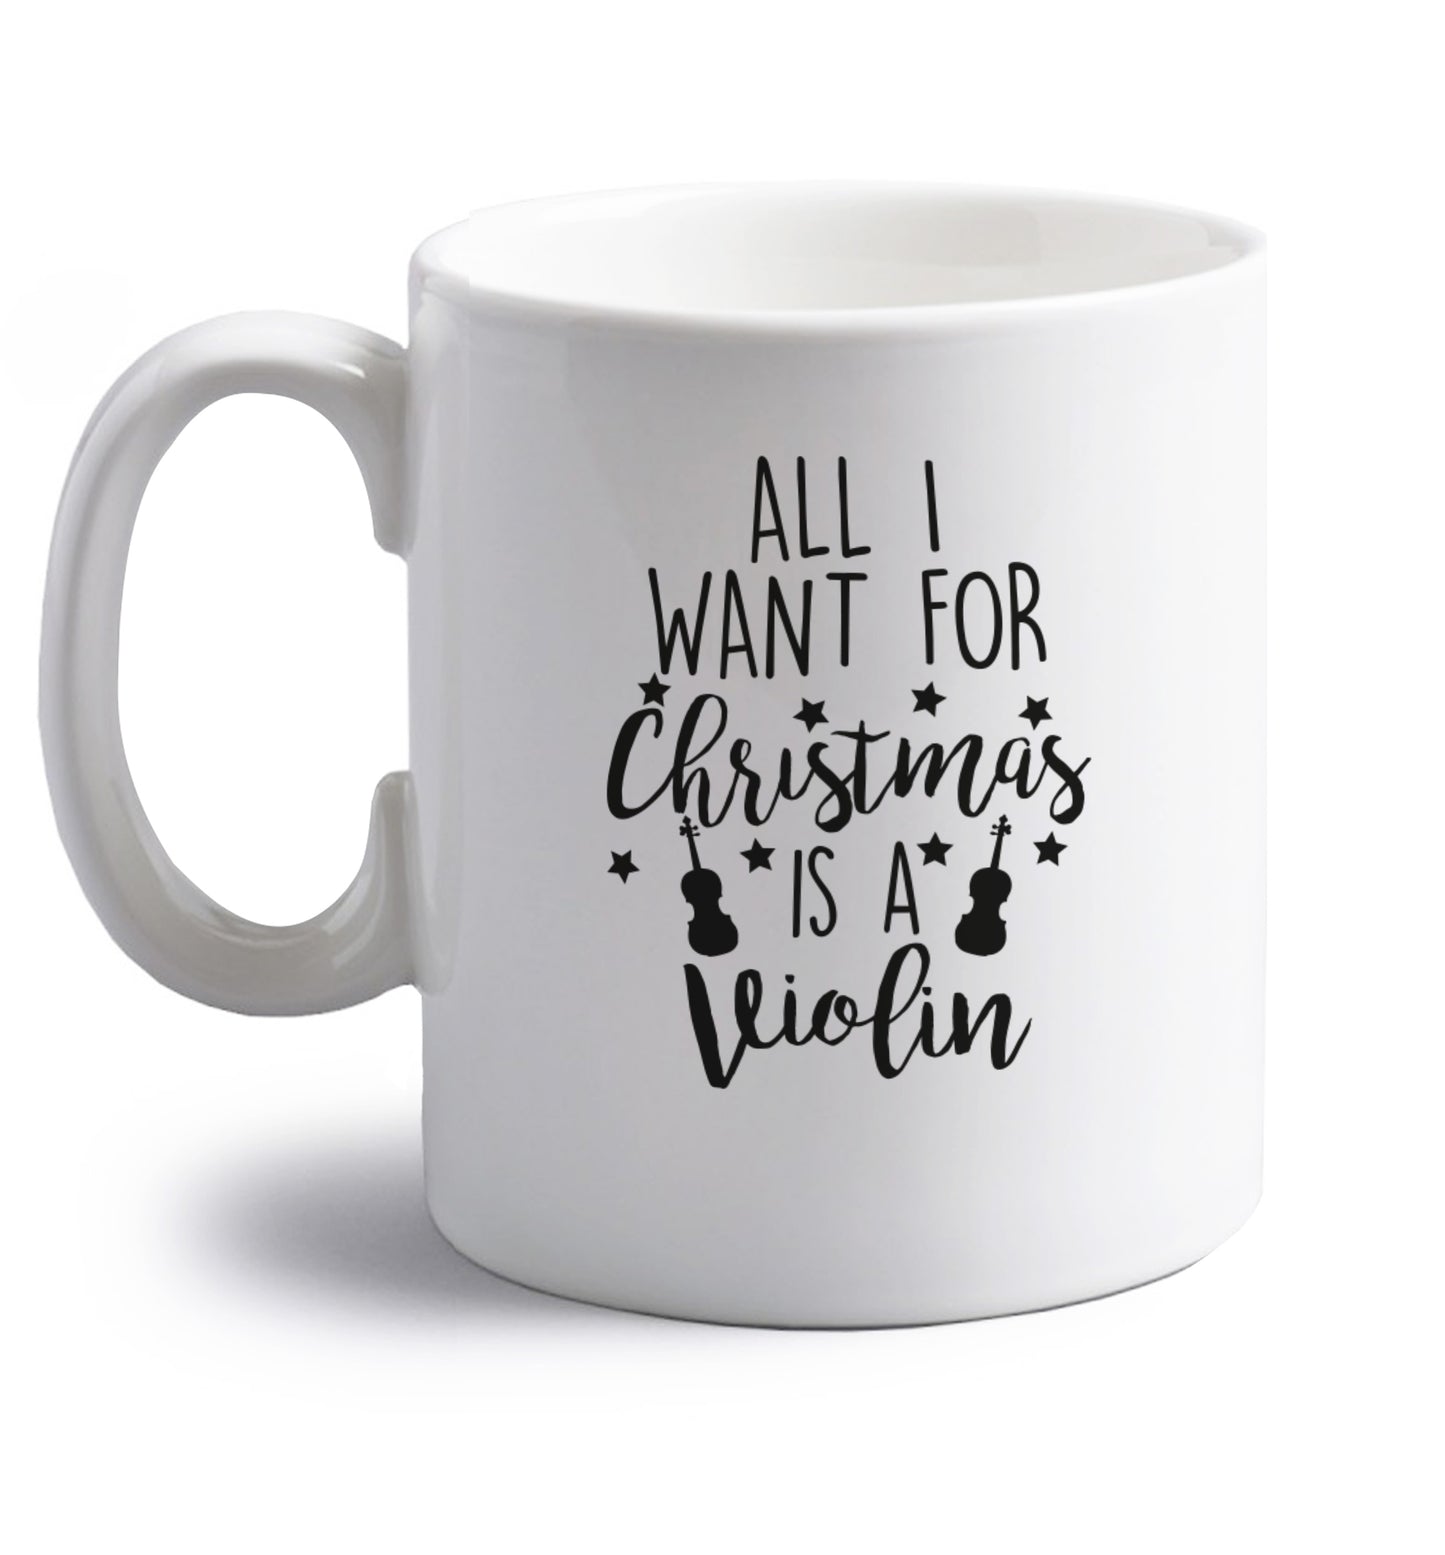 All I Want For Christmas is a Violin right handed white ceramic mug 